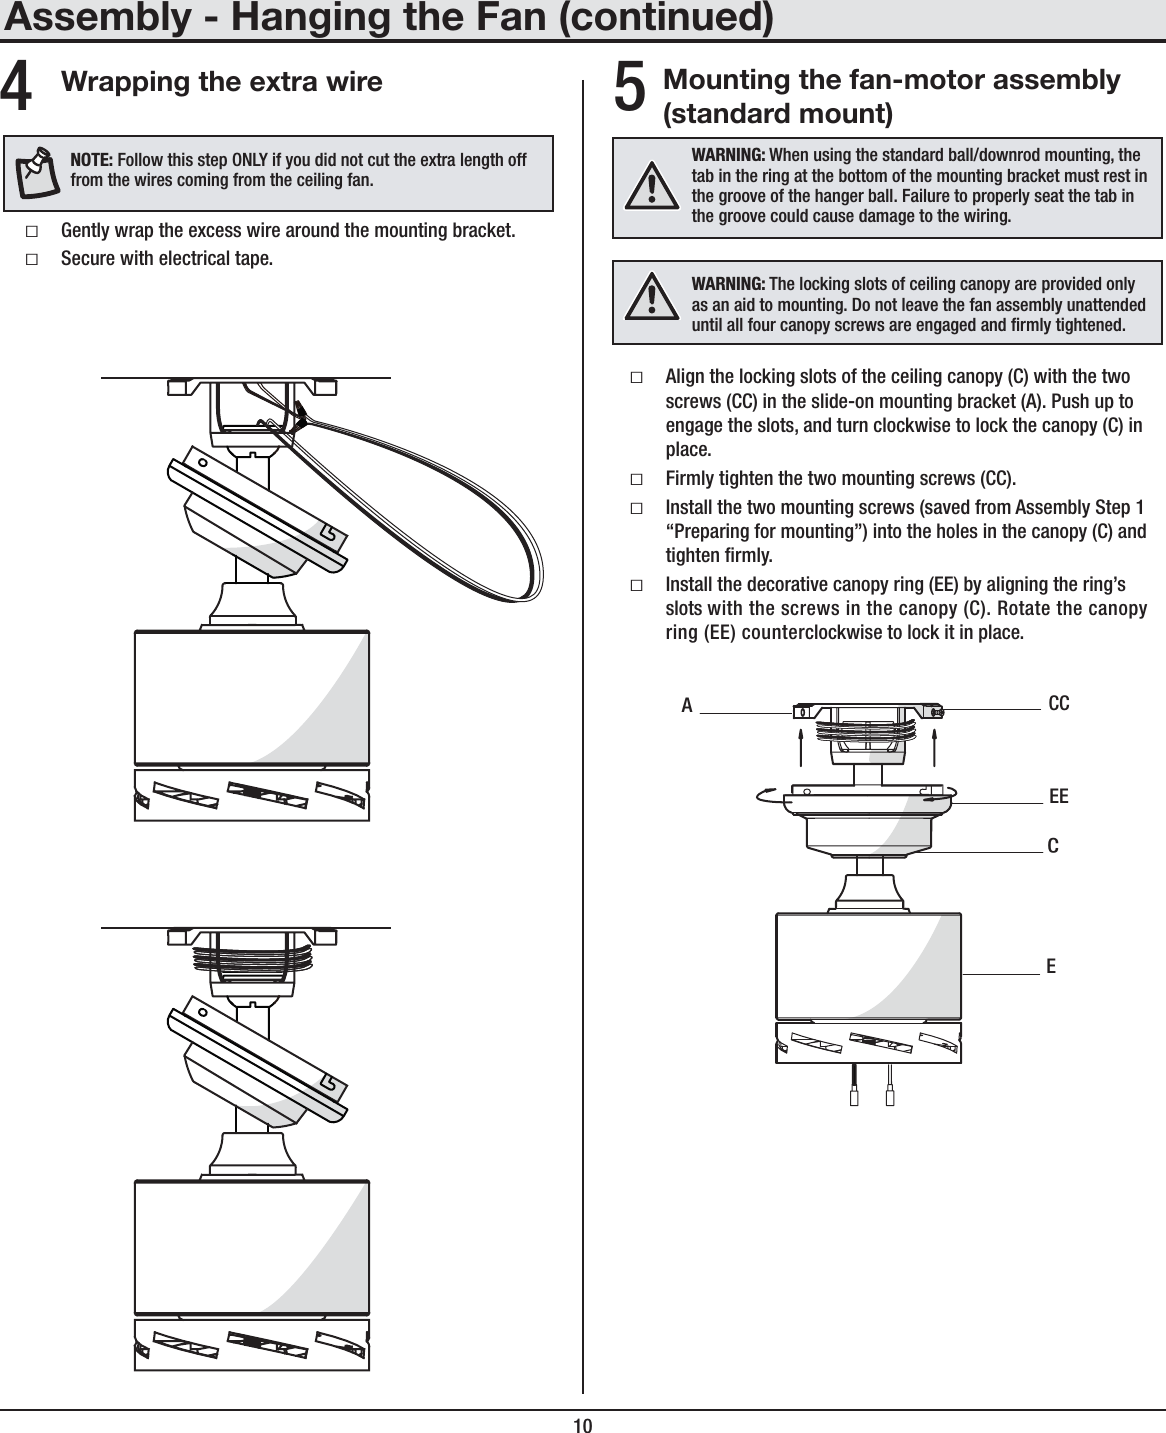 10Mounting the fan-motor assembly (standard mount)ƑAlign the locking slots of the ceiling canopy (C) with the two screws (CC) in the slide-on mounting bracket (A). Push up to engage the slots, and turn clockwise to lock the canopy (C) in place.ƑFirmly tighten the two mounting screws (CC).ƑInstall the two mounting screws (saved from Assembly Step 1 “Preparing for mounting”) into the holes in the canopy (C) and tighten rmly.ƑInstall the decorative canopy ring (EE) by aligning the ring’s slots with the screws in the canopy (C). Rotate the canopy ring (EE) counterclockwise to lock it in place.WARNING: When using the standard ball/downrod mounting, the tab in the ring at the bottom of the mounting bracket must rest in the groove of the hanger ball. Failure to properly seat the tab in the groove could cause damage to the wiring.ECCCEEAAssembly - Hanging the Fan (continued)5Wrapping the extra wireƑGently wrap the excess wire around the mounting bracket.ƑSecure with electrical tape.4NOTE: Follow this step ONLY if you did not cut the extra length off from the wires coming from the ceiling fan.WARNING: The locking slots of ceiling canopy are provided only as an aid to mounting. Do not leave the fan assembly unattended until all four canopy screws are engaged and rmly tightened.